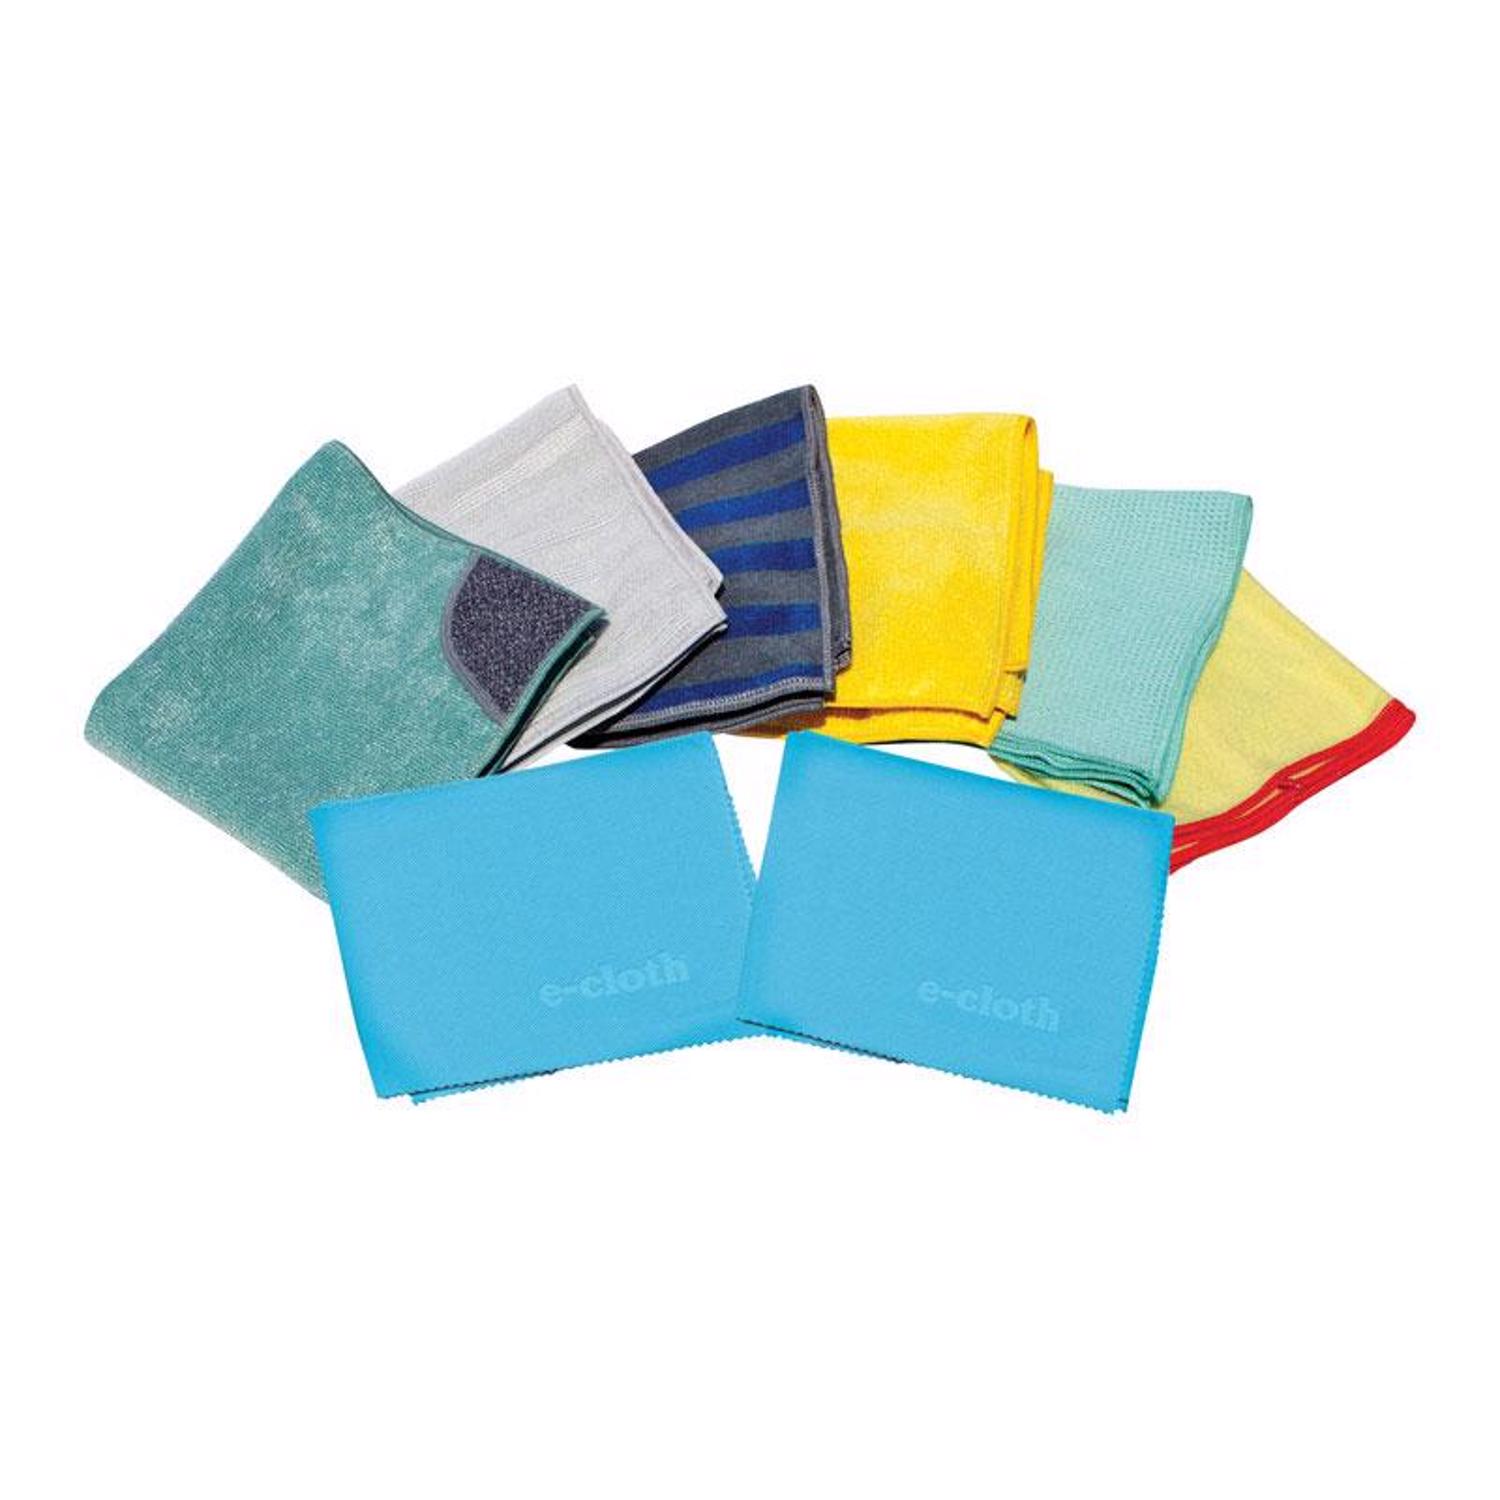 E-Cloth Home Cleaning Microfiber Home Cleaning Set 8 pk